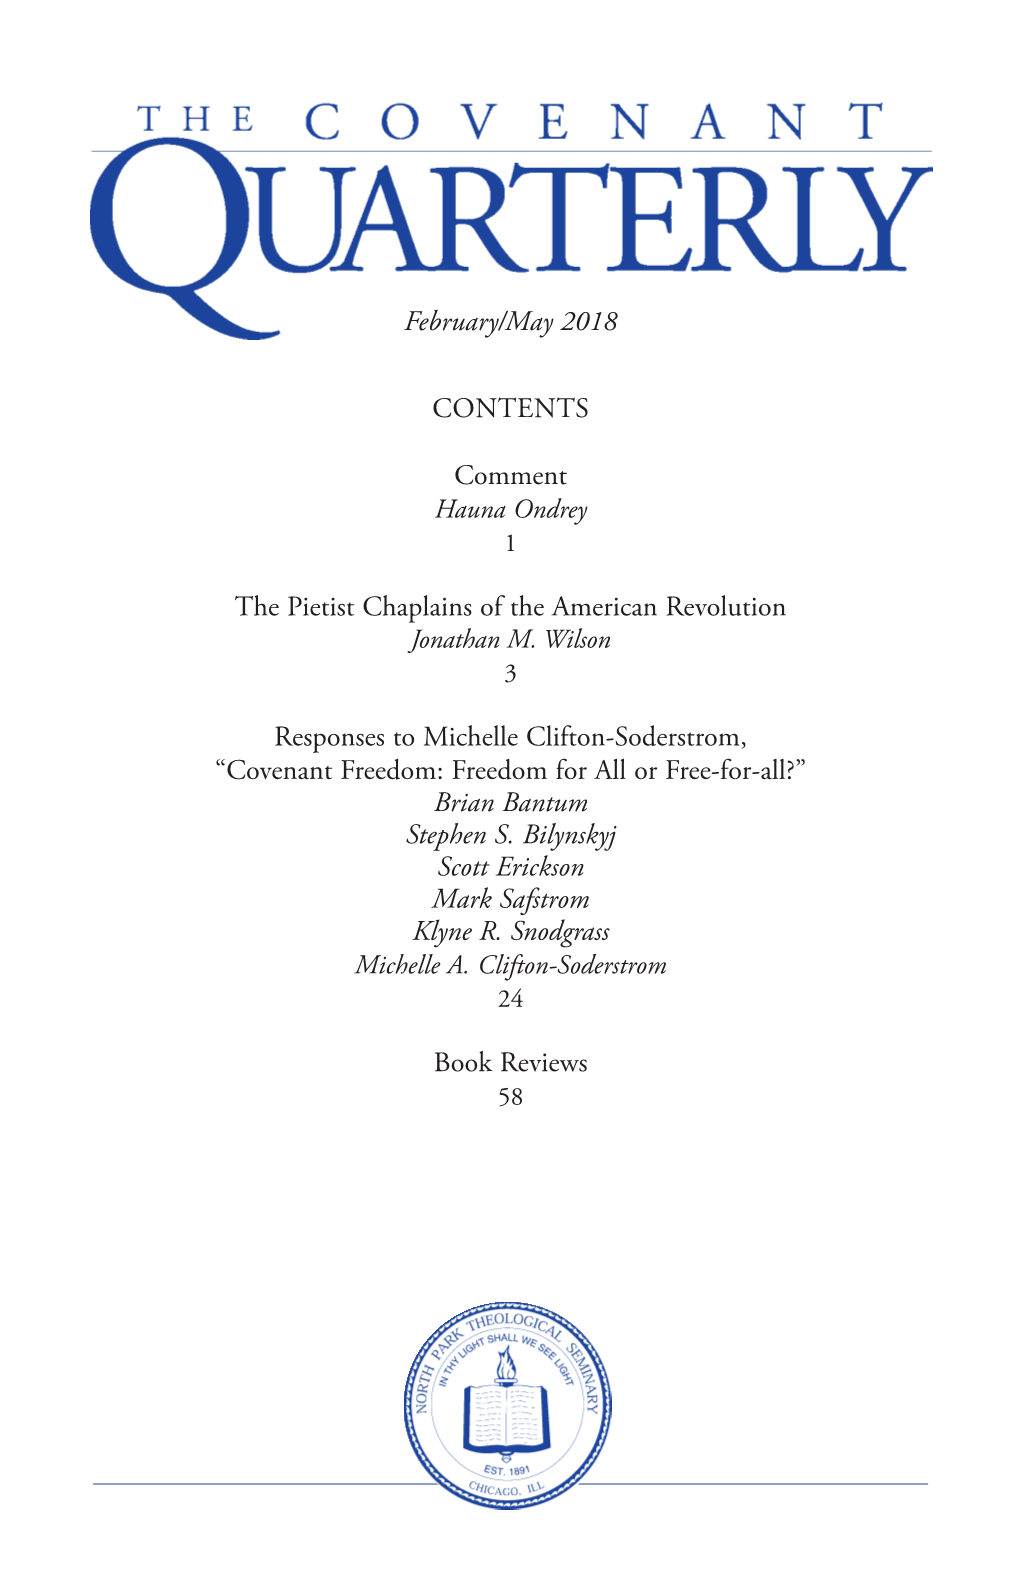 February/May 2018 CONTENTS Comment the Pietist Chaplains of the American Revolution Responses to Michelle Clifton-Soderstrom